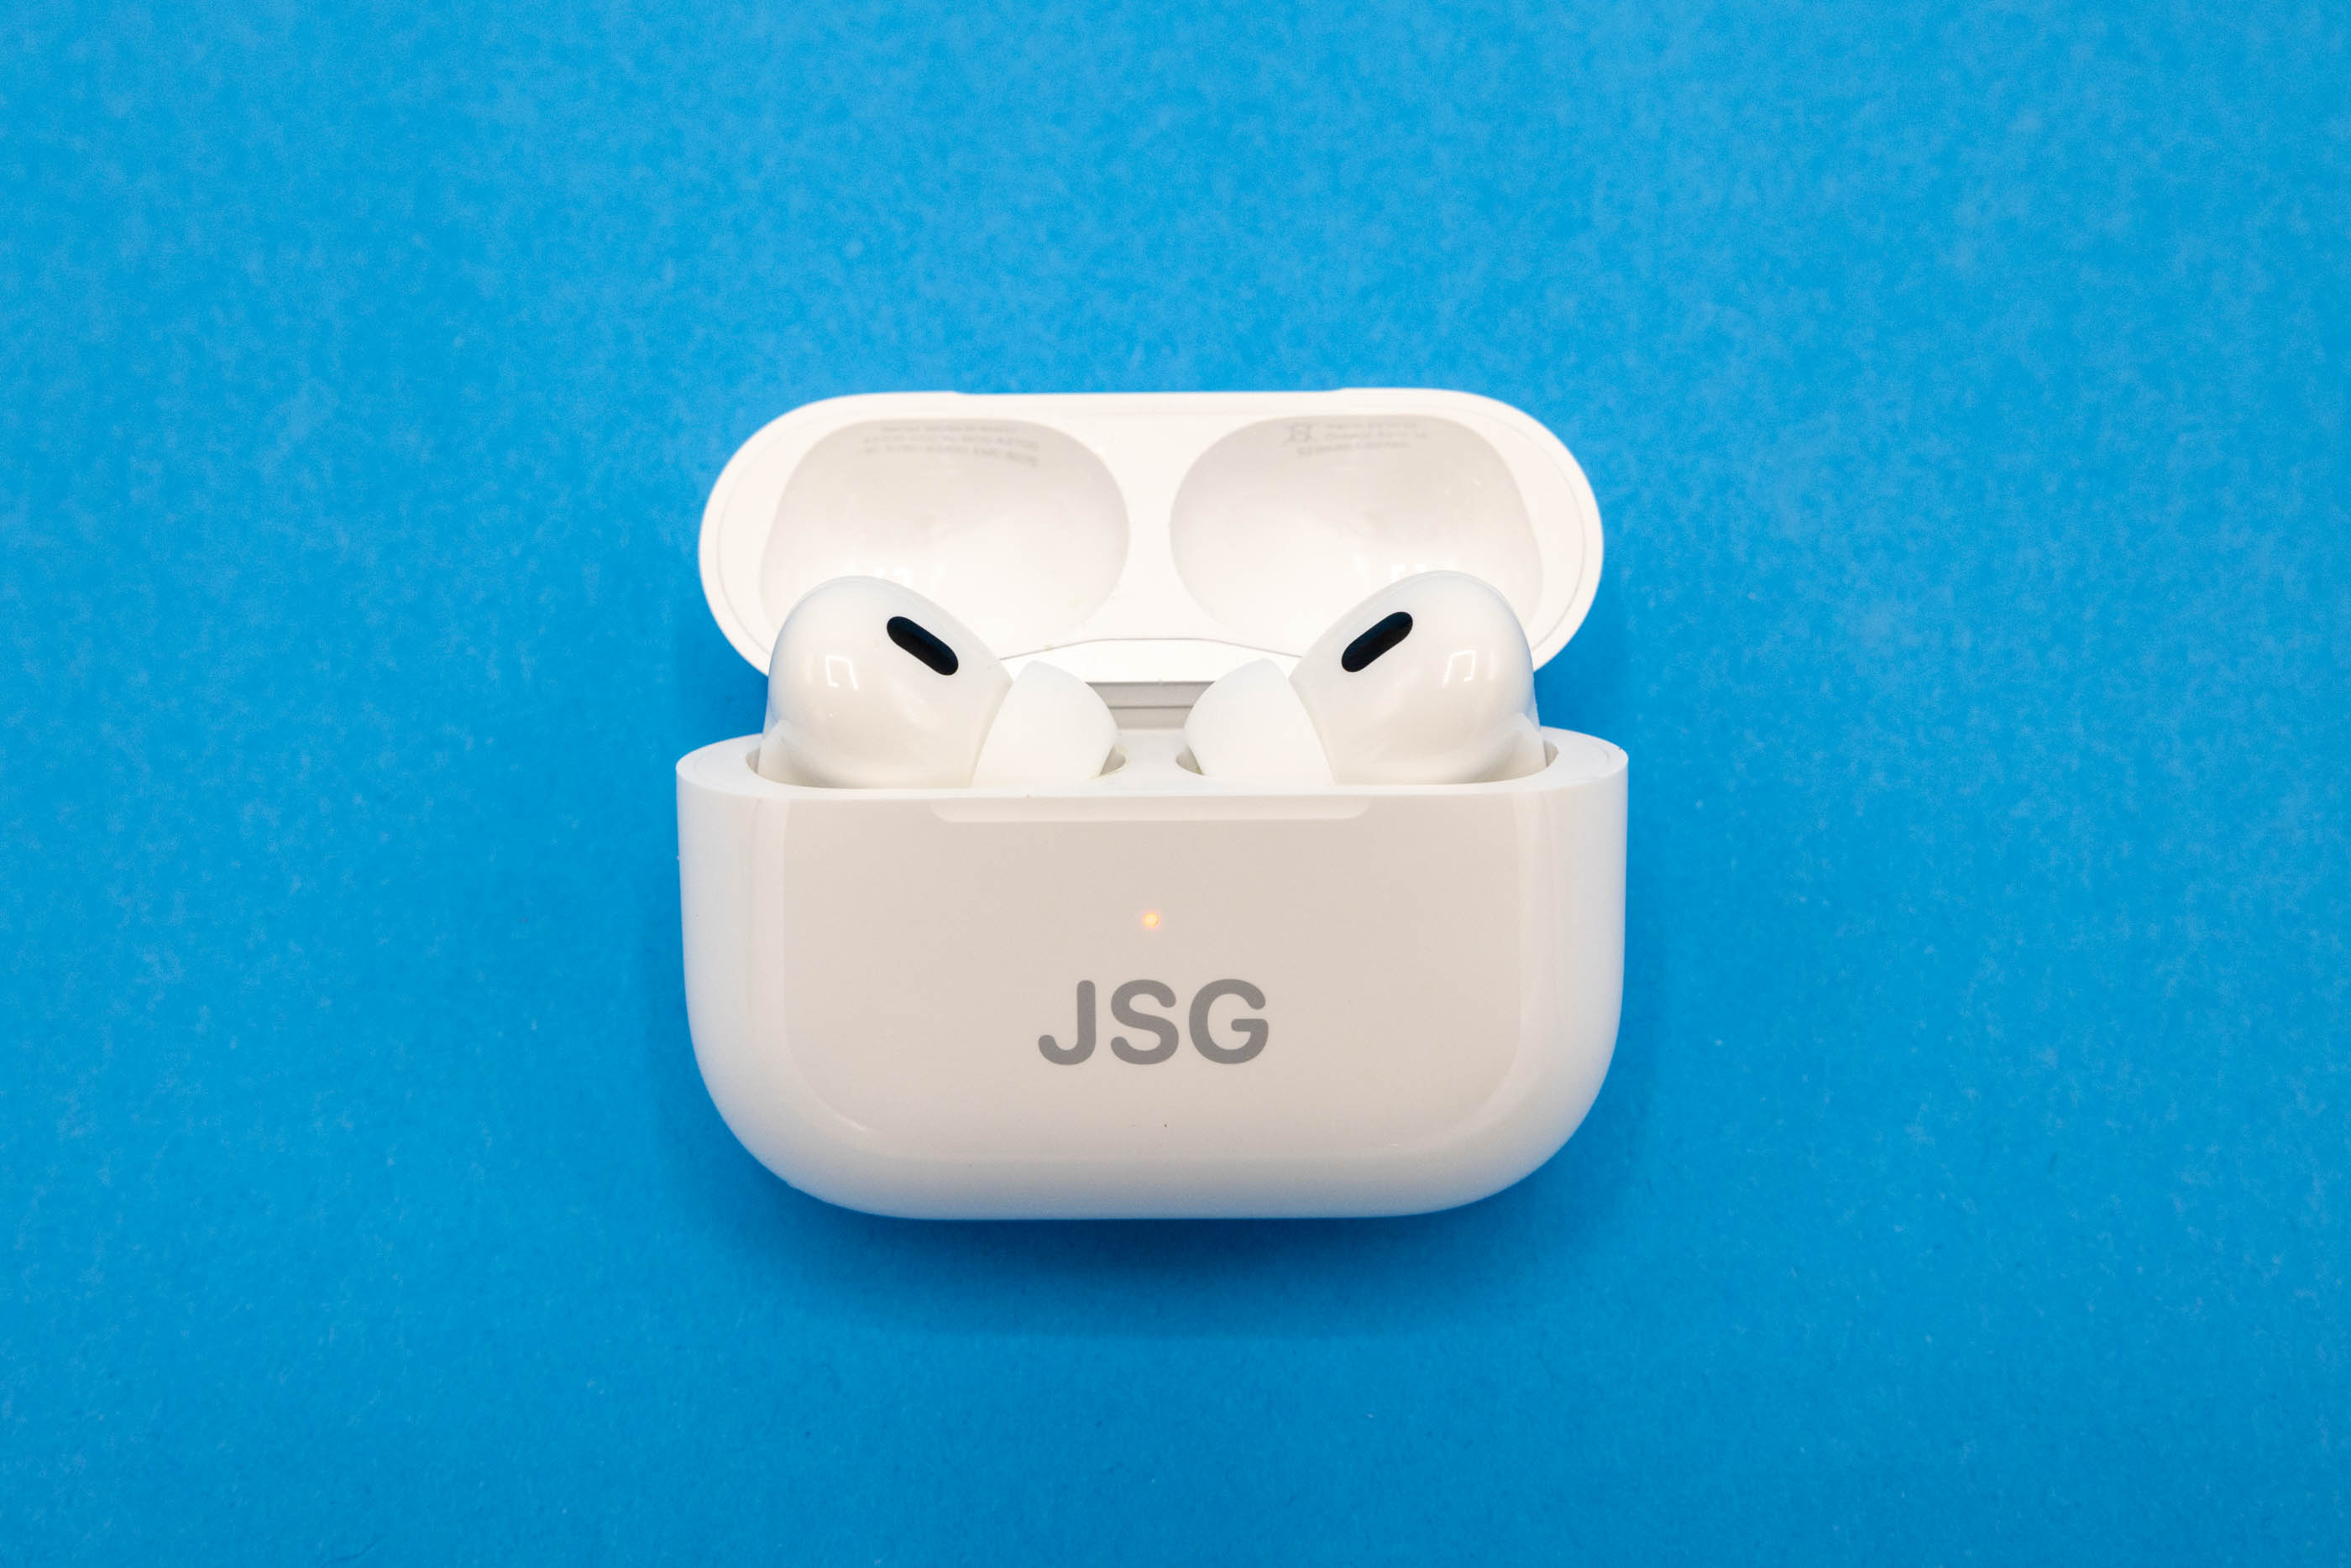 Connect your AirPods and AirPods Pro to your iPhone - Apple Support